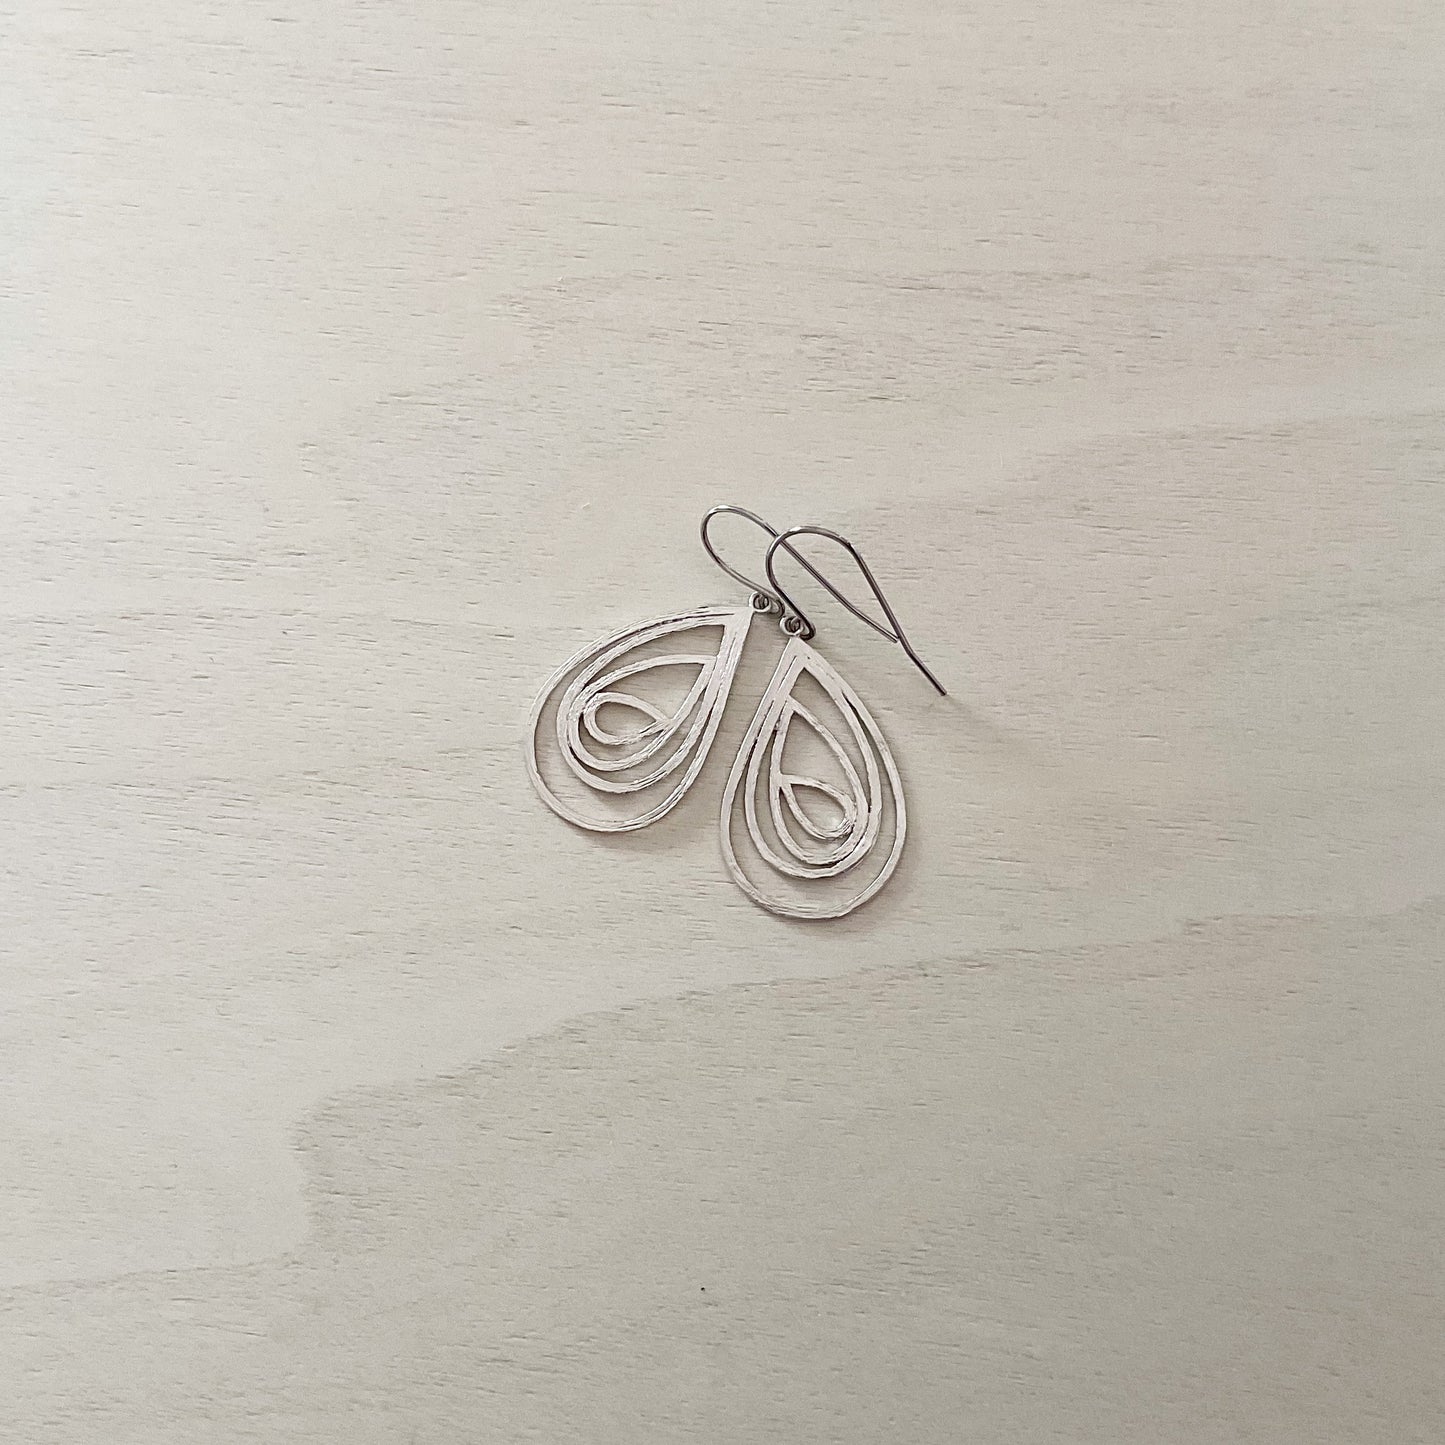 Rippled Water Earring Set - Platinum Silver